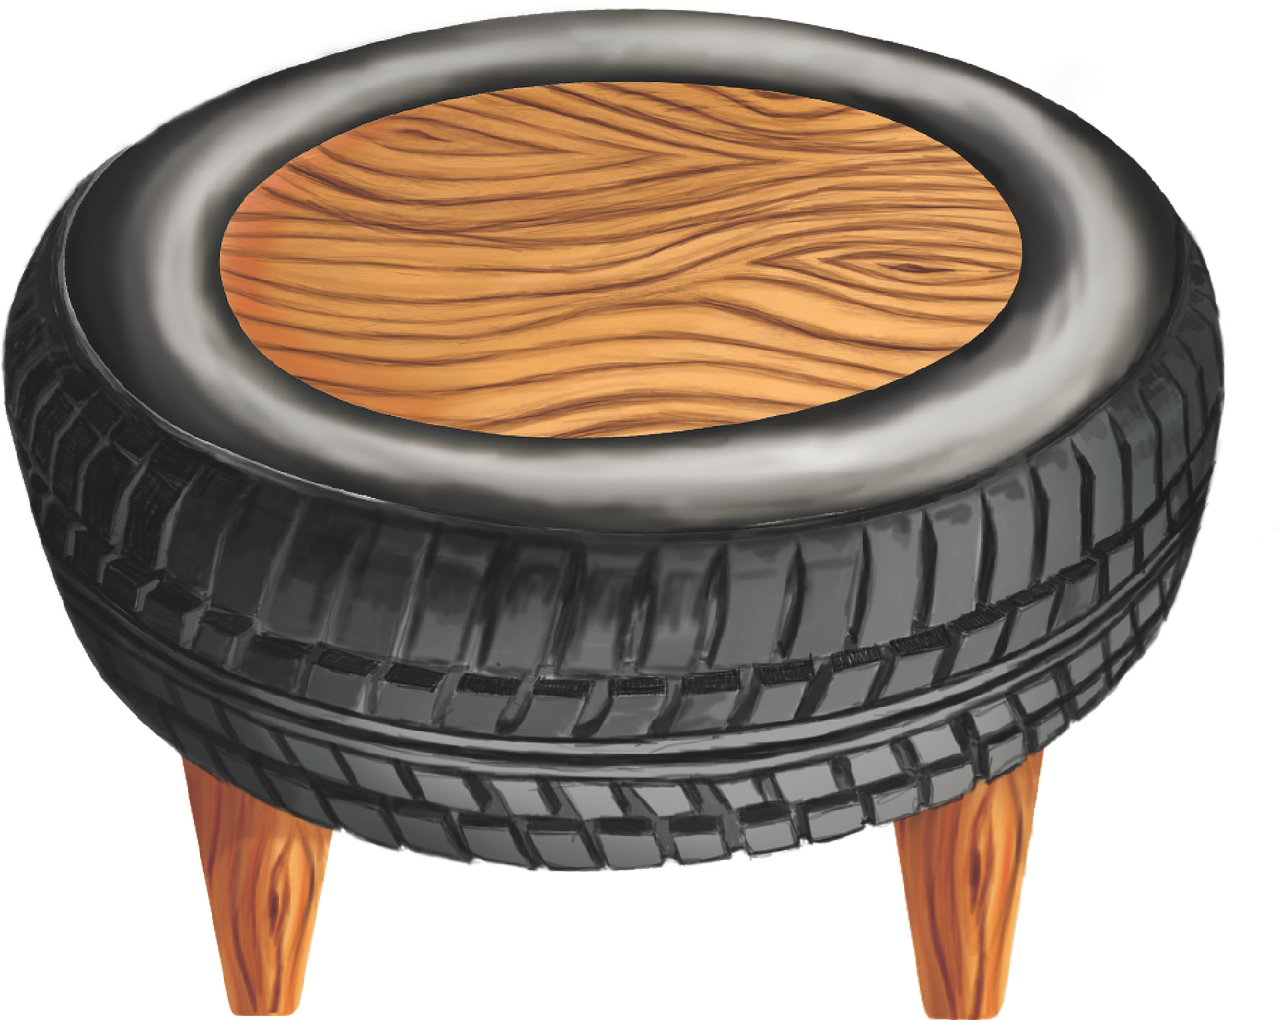 Download free photo of Absurd, rubber, stool, free vector graphics ...